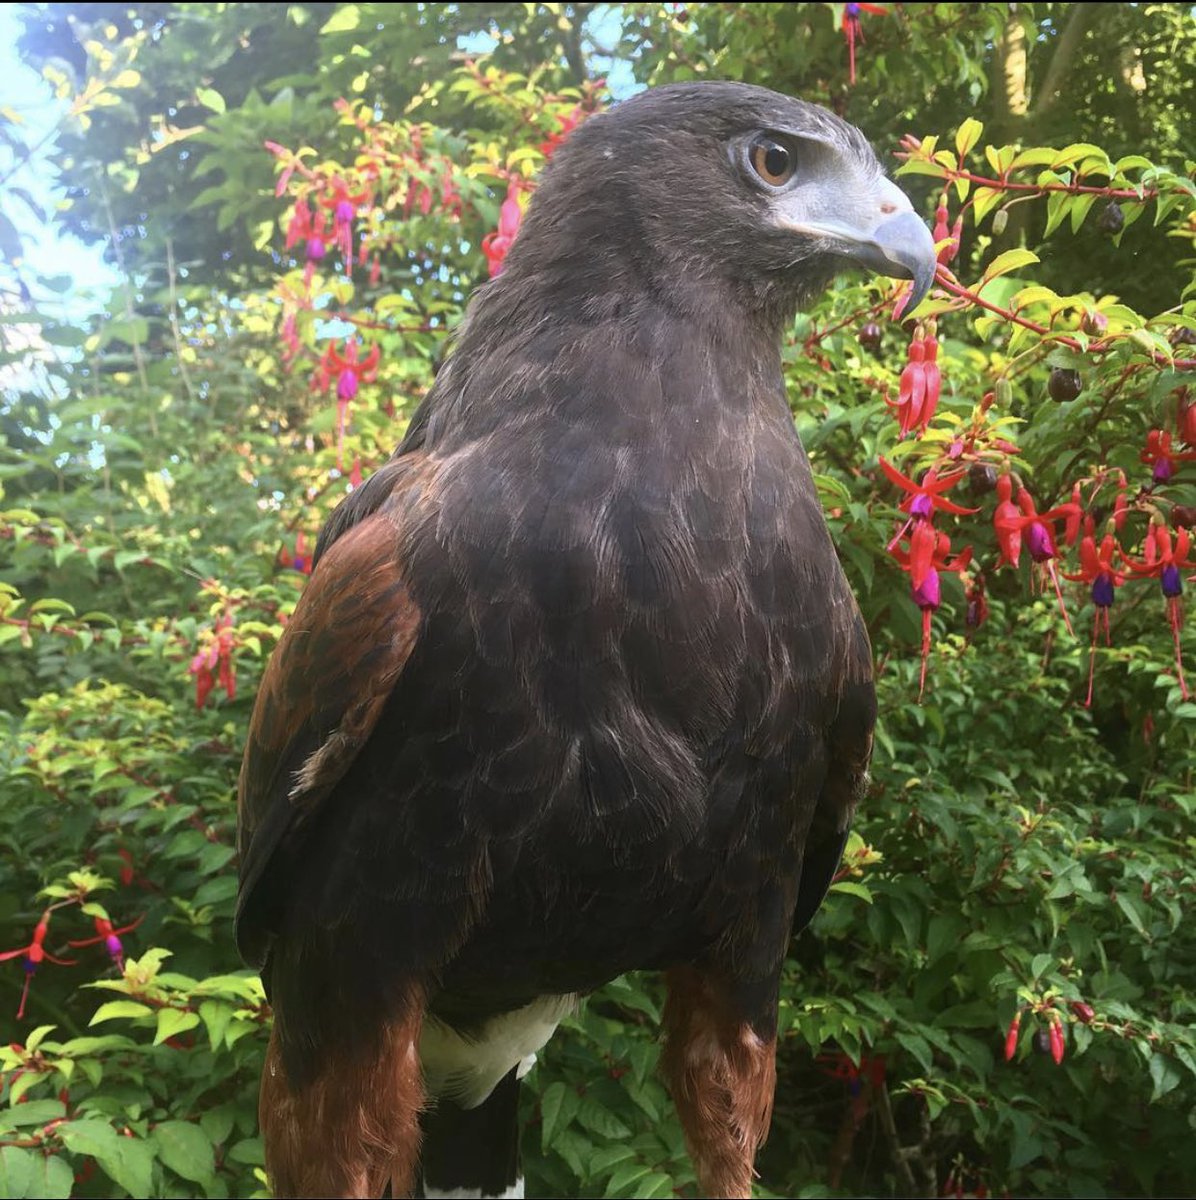 PidgeotThis is Aztec, the Harris hawk. We used to hunt rabbits together for the ferrets dinner.